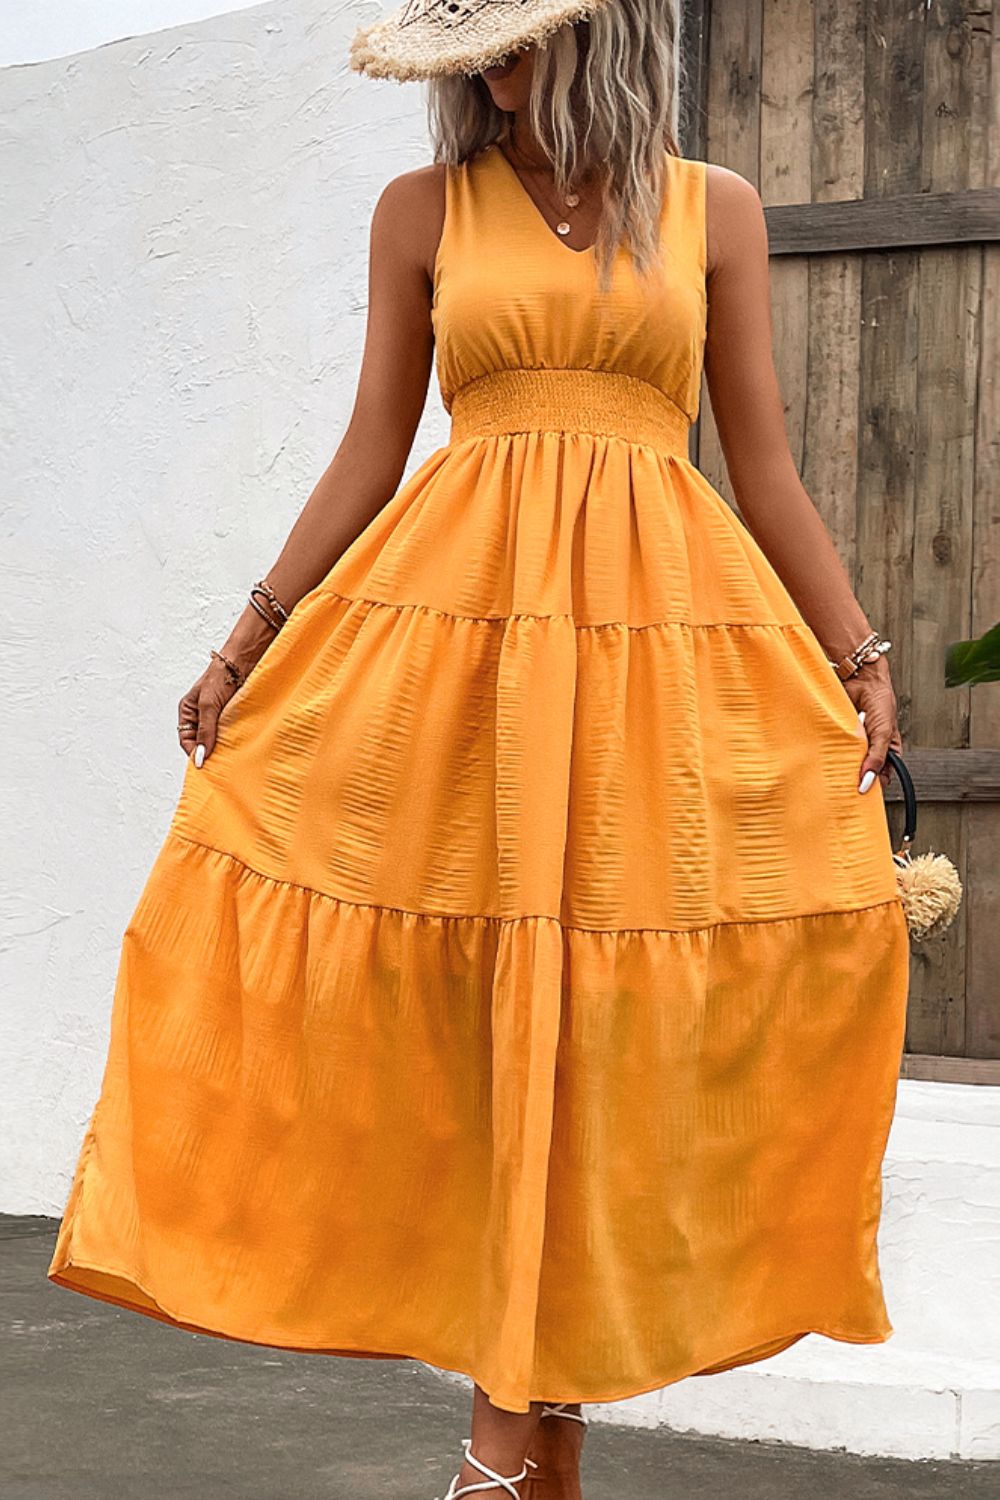 Jessica V-Neck Smocked Waist Sleeveless Tiered Dress- 2 size 2XLs left in Tangerine and 1 size 2XL left in Blush Pink! FINAL SALE!